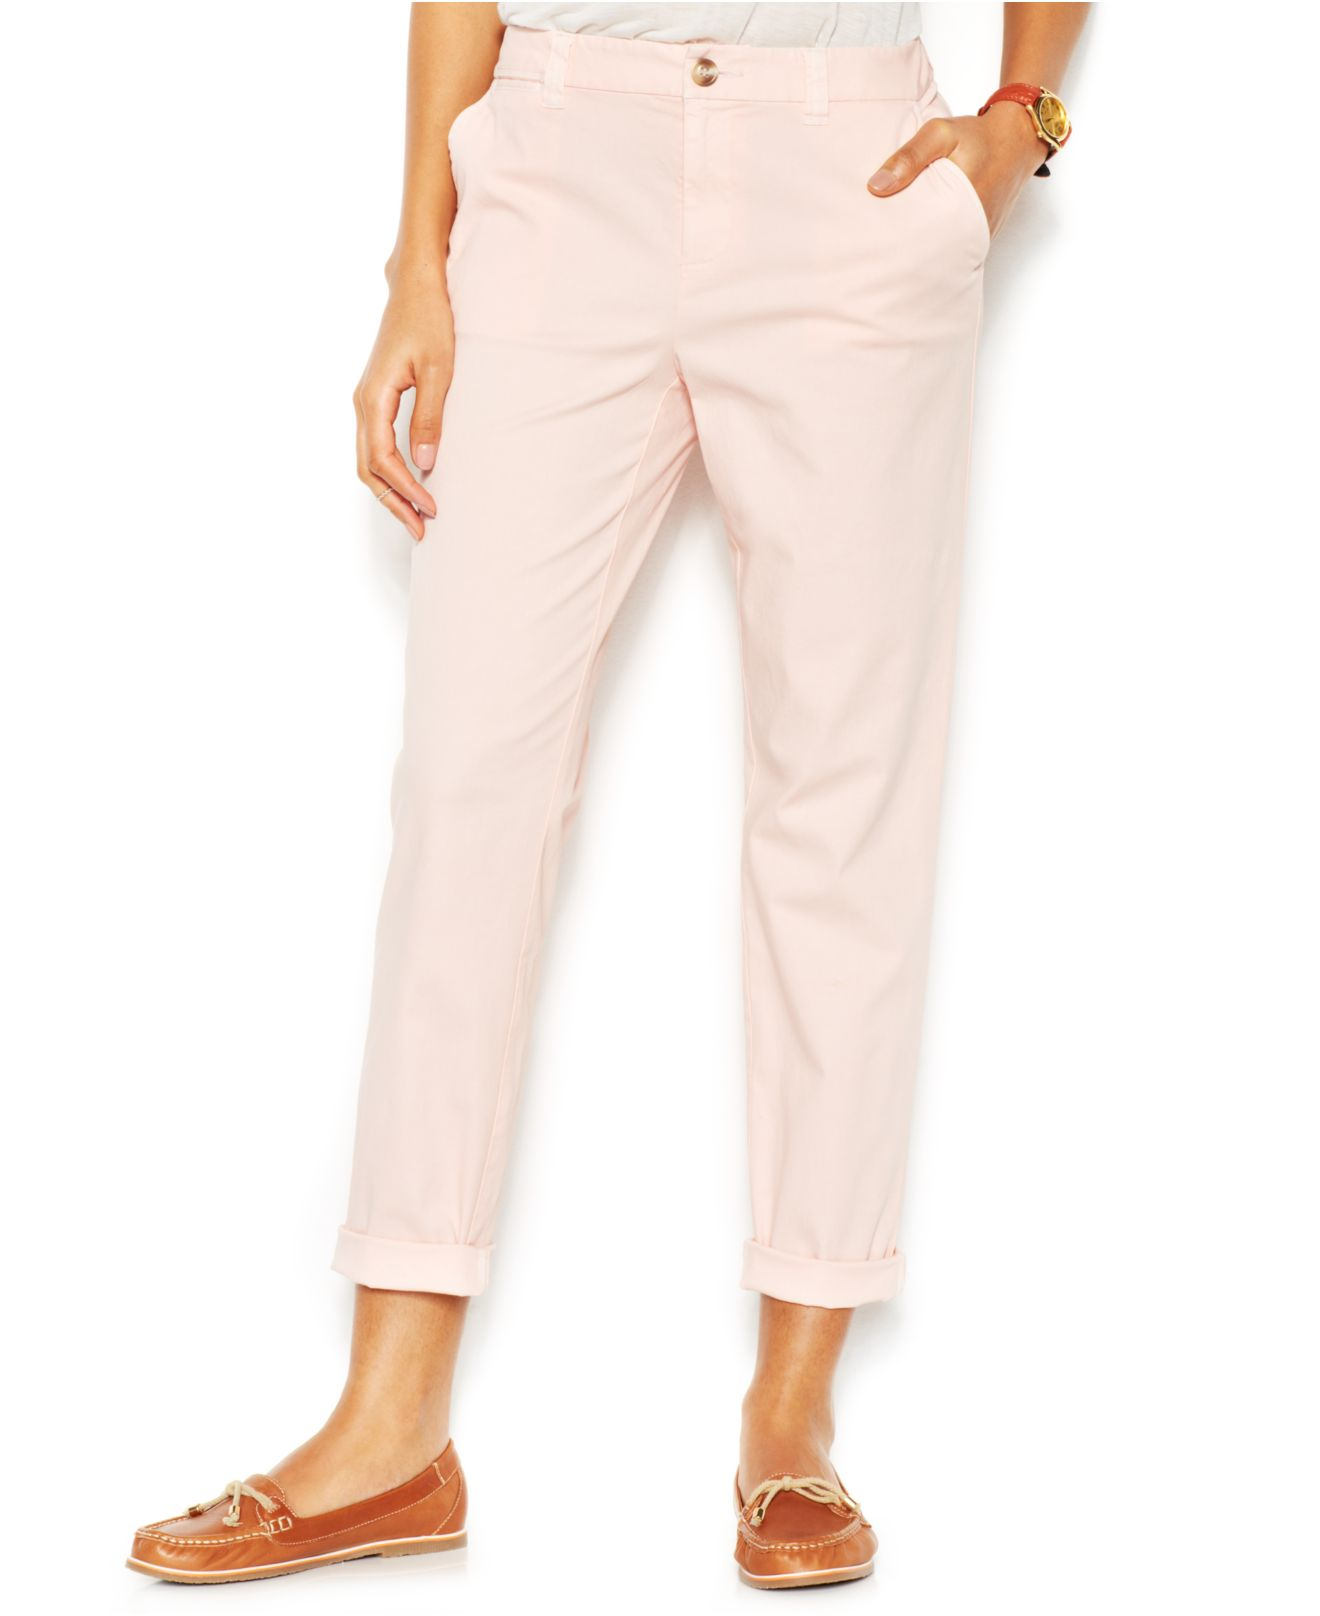 Maison jules Cropped Straight-leg Lou Lou Pants in Natural | Lyst